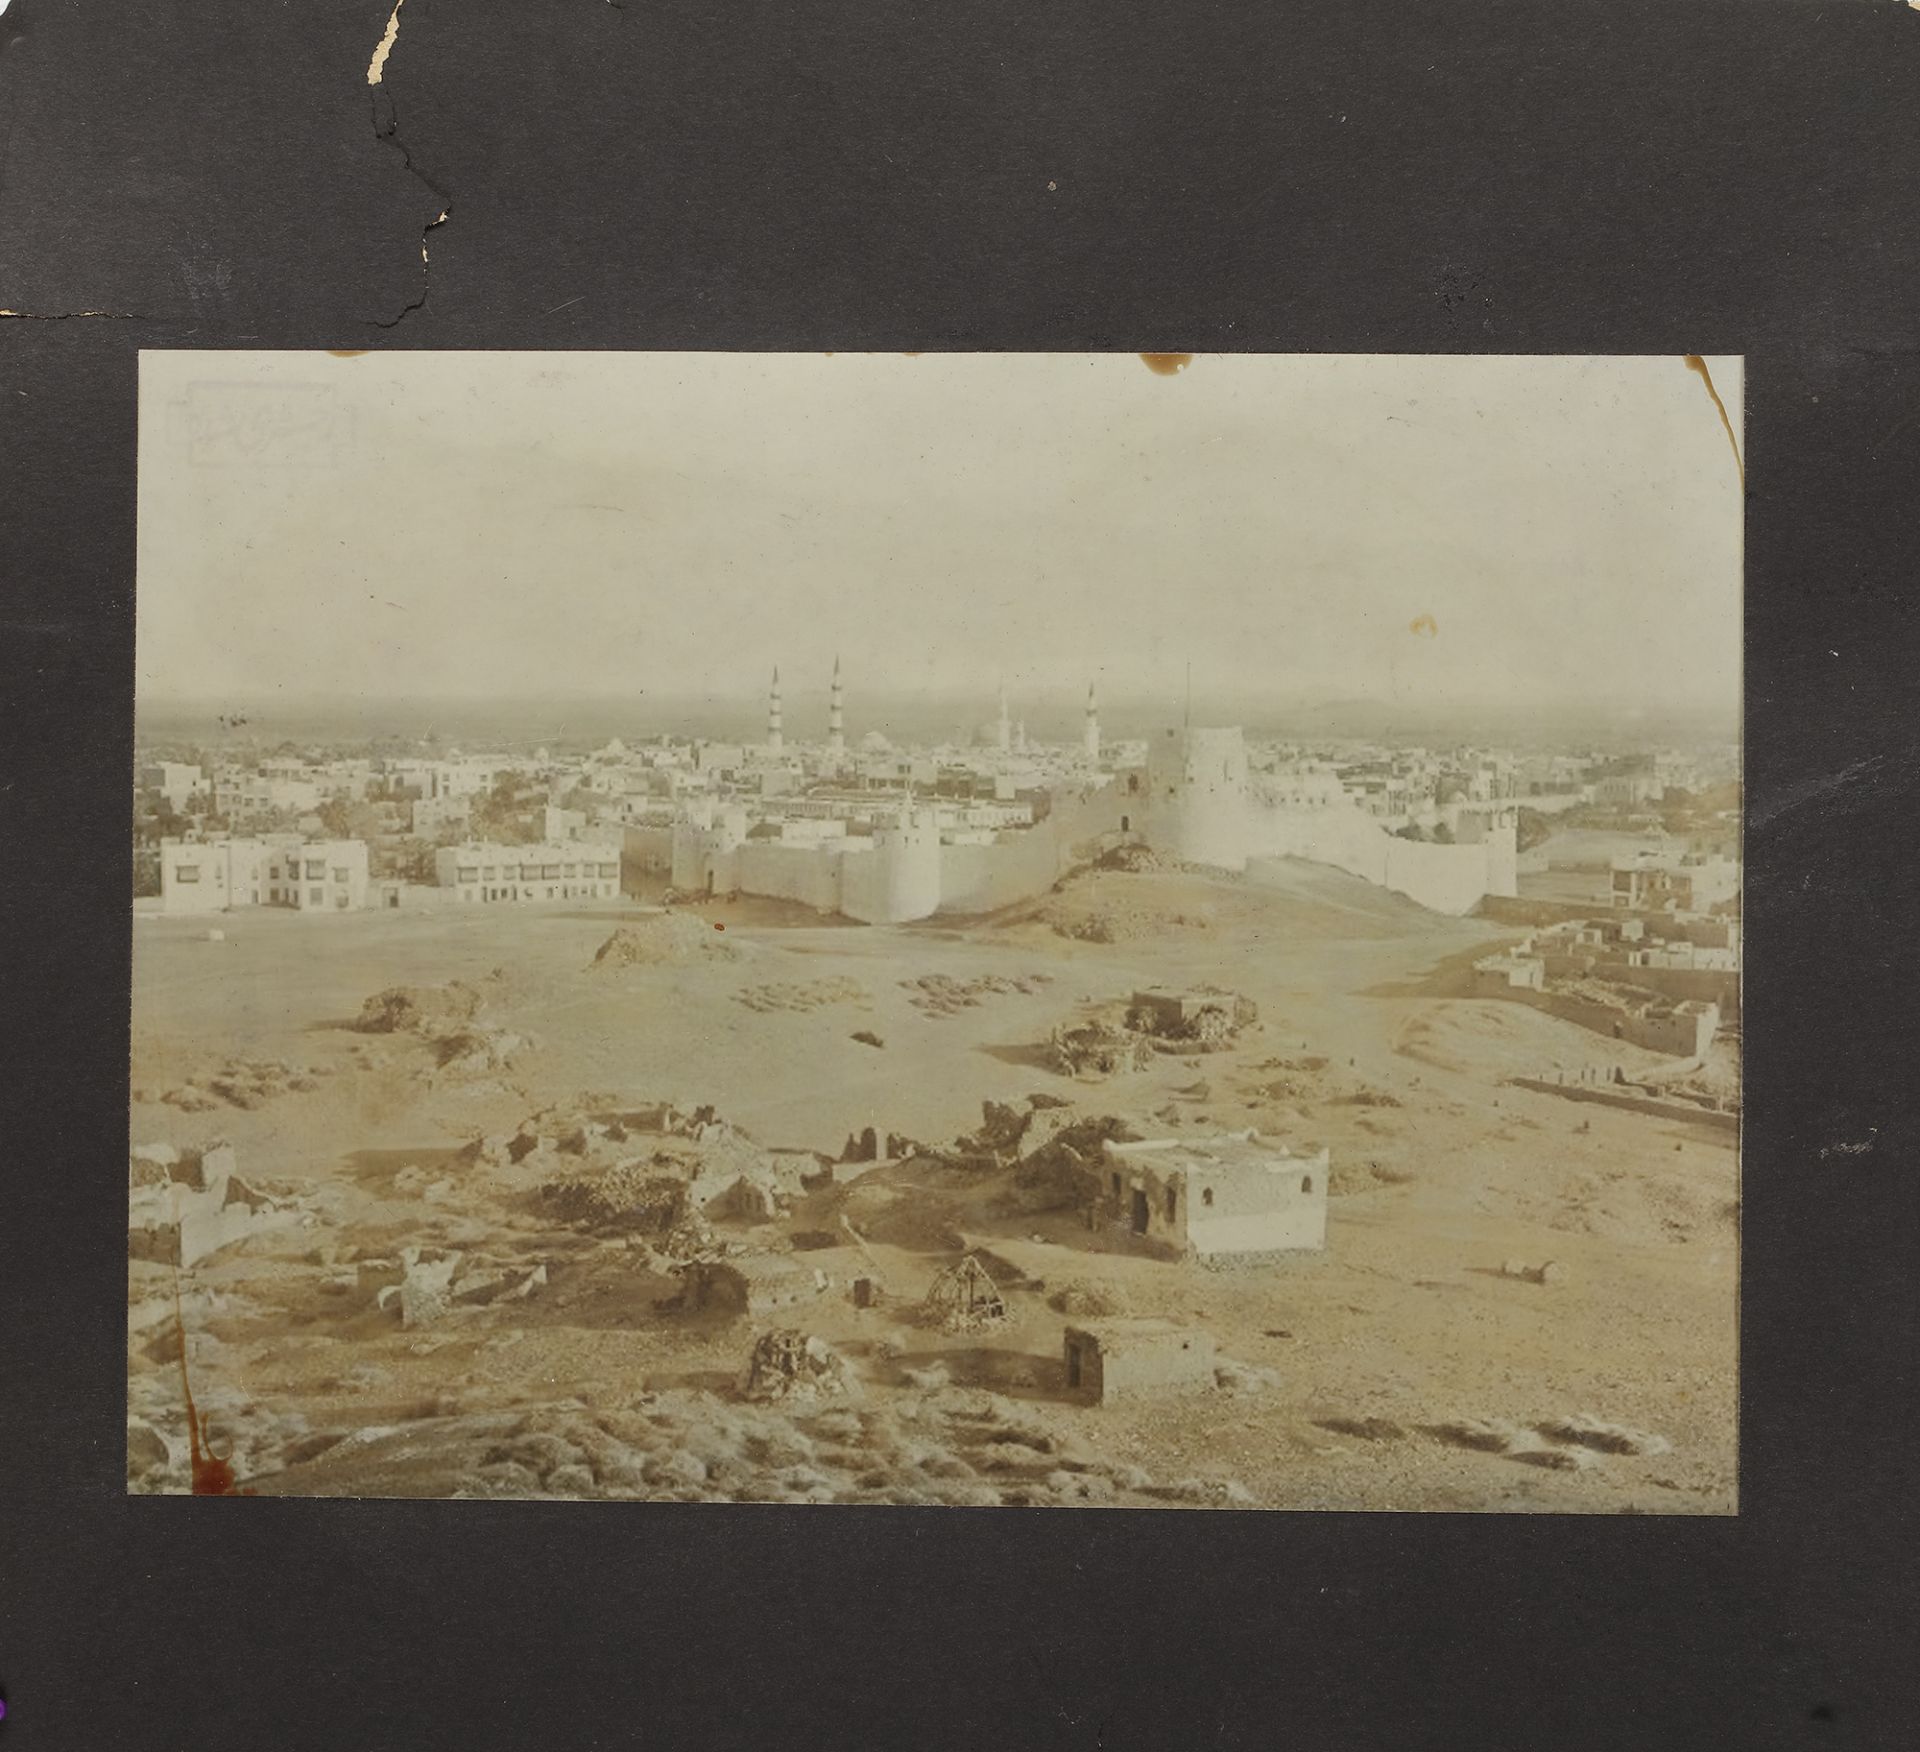 MECCA AND MEDINA, A COLLECTION OF 14 PHOTOGRAPHS DURING THE HAJJ, EARLY 20TH CENTURY - Image 2 of 15